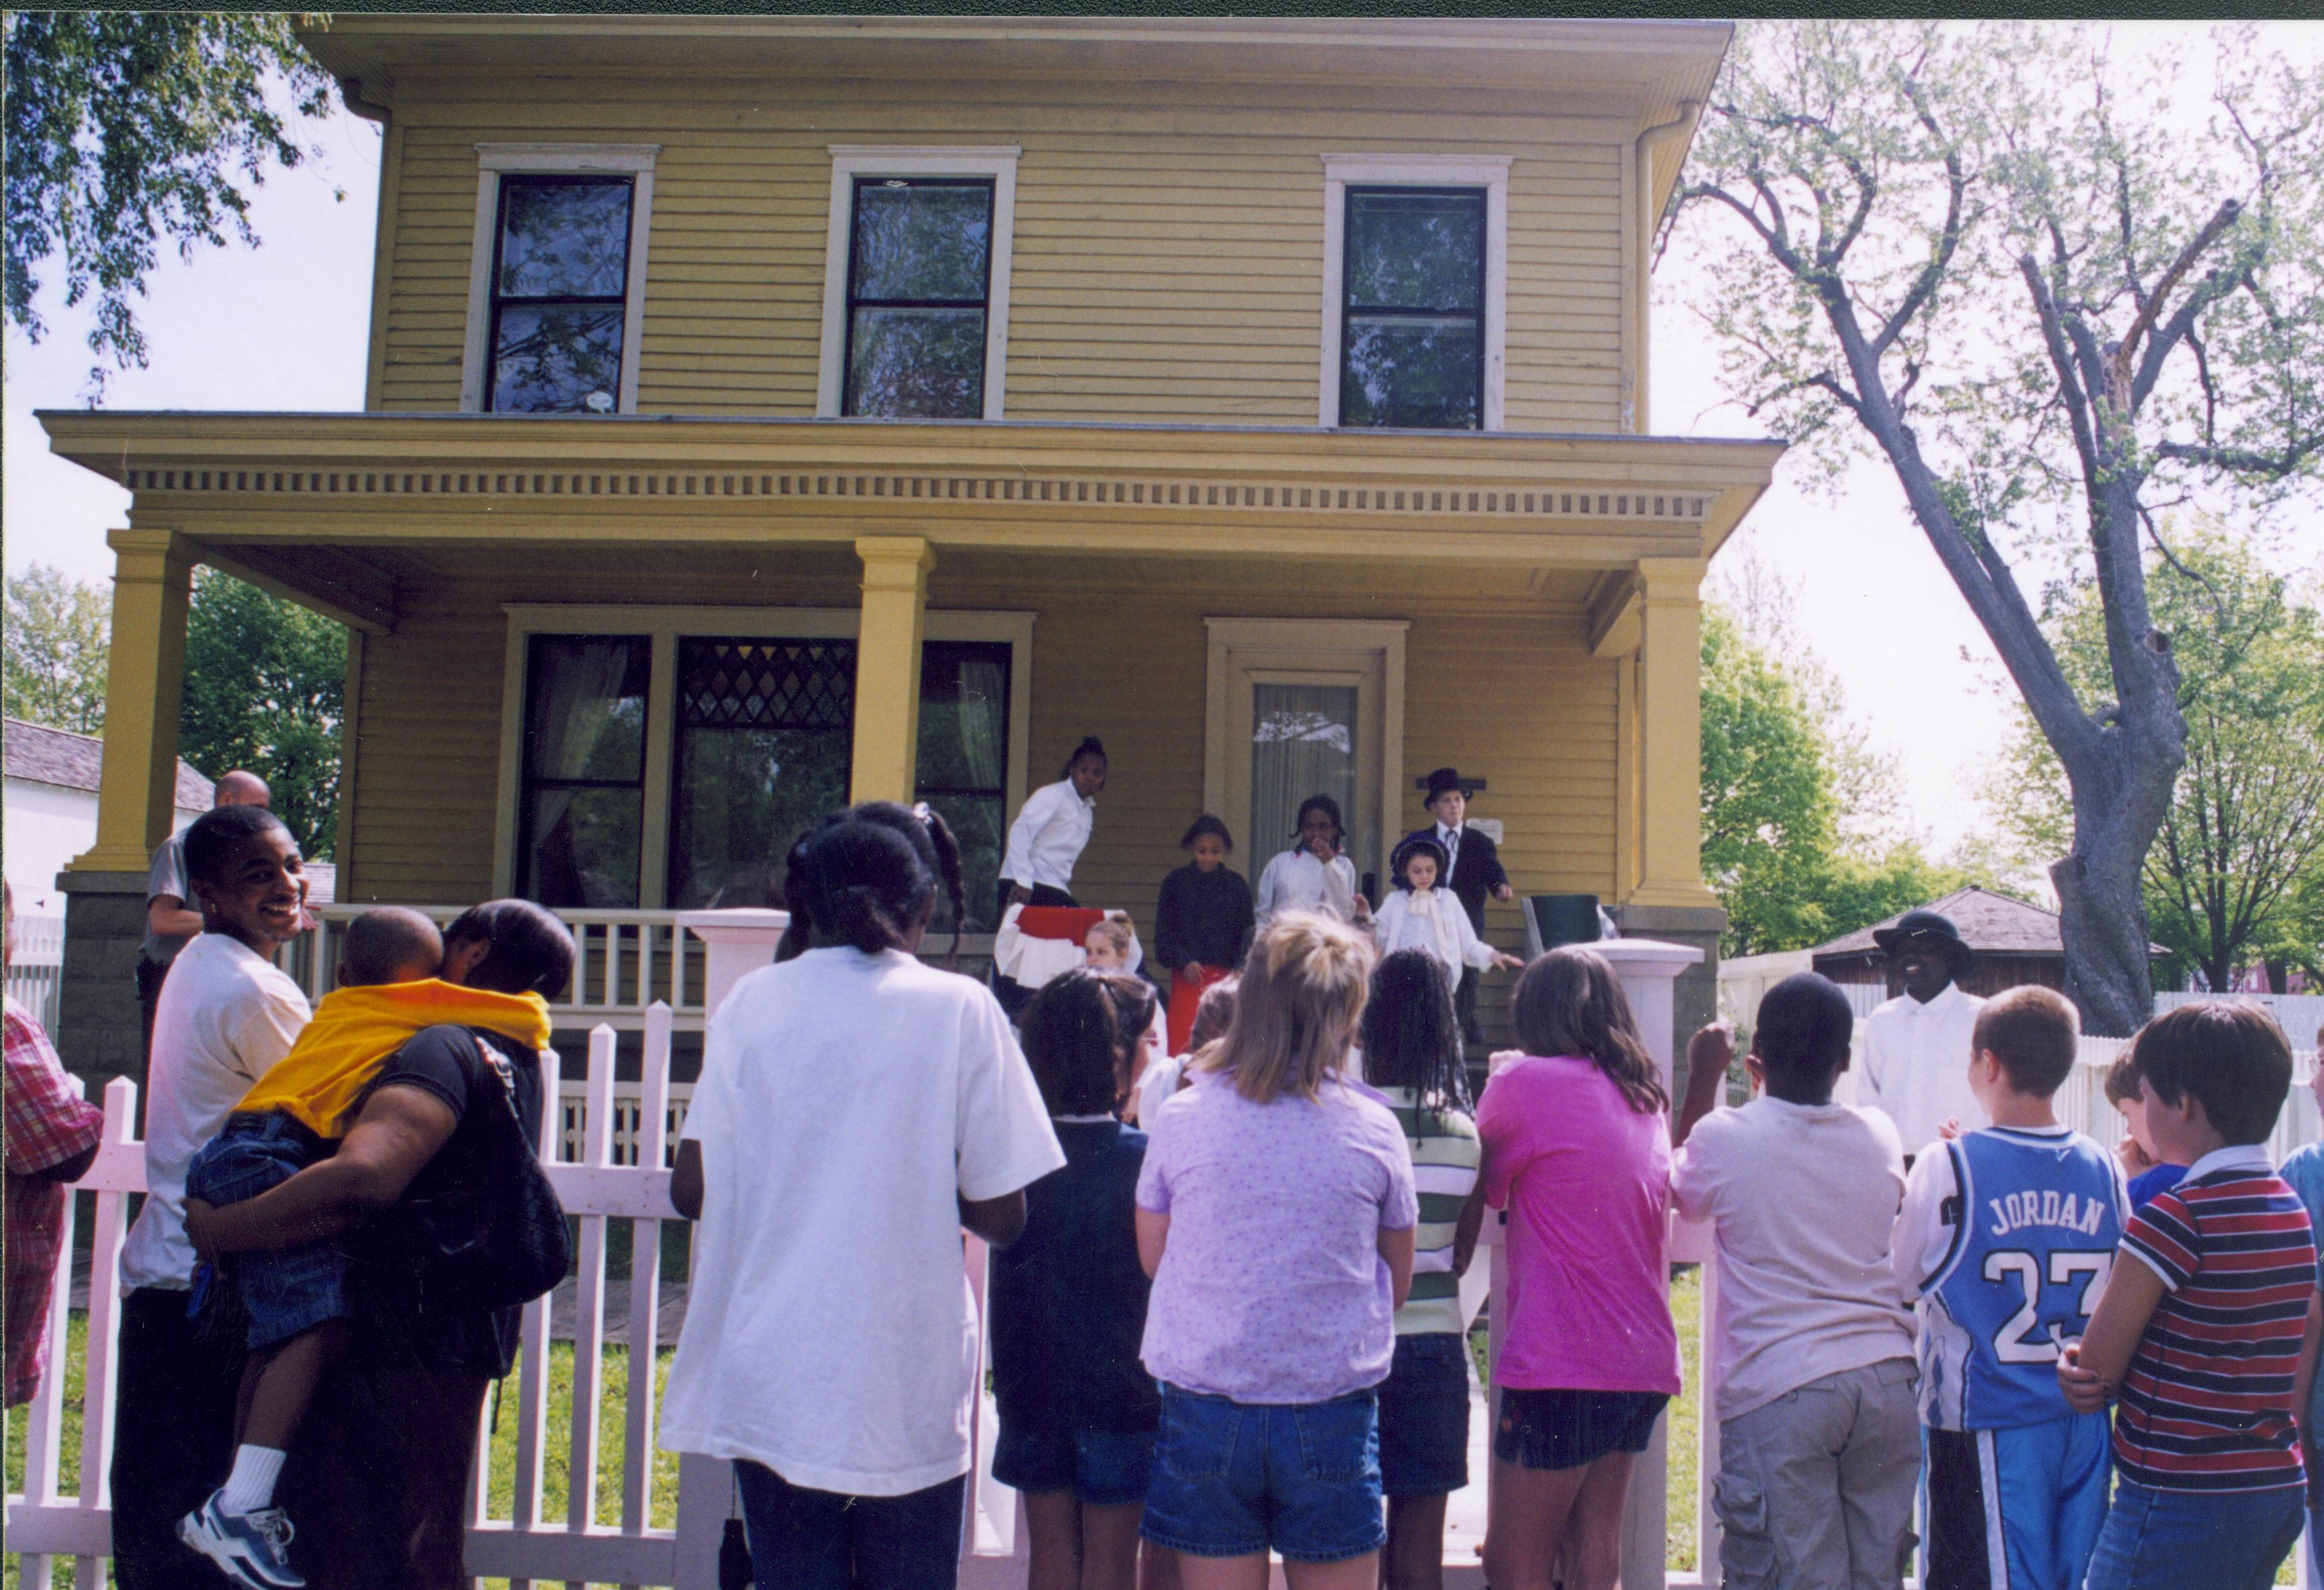 Dubois School Living History program - students perform skit on Women's Rights from Cook House porch while a school group watches.  Ranger Matt Brown just visible on left in front of porch. Arnold Barn visible on far left. Robinson Shed in background right. Looking East from 8th Street Dubois School, living history, Cook Robinson Shed, Arnold Barn, staff, students, school groups